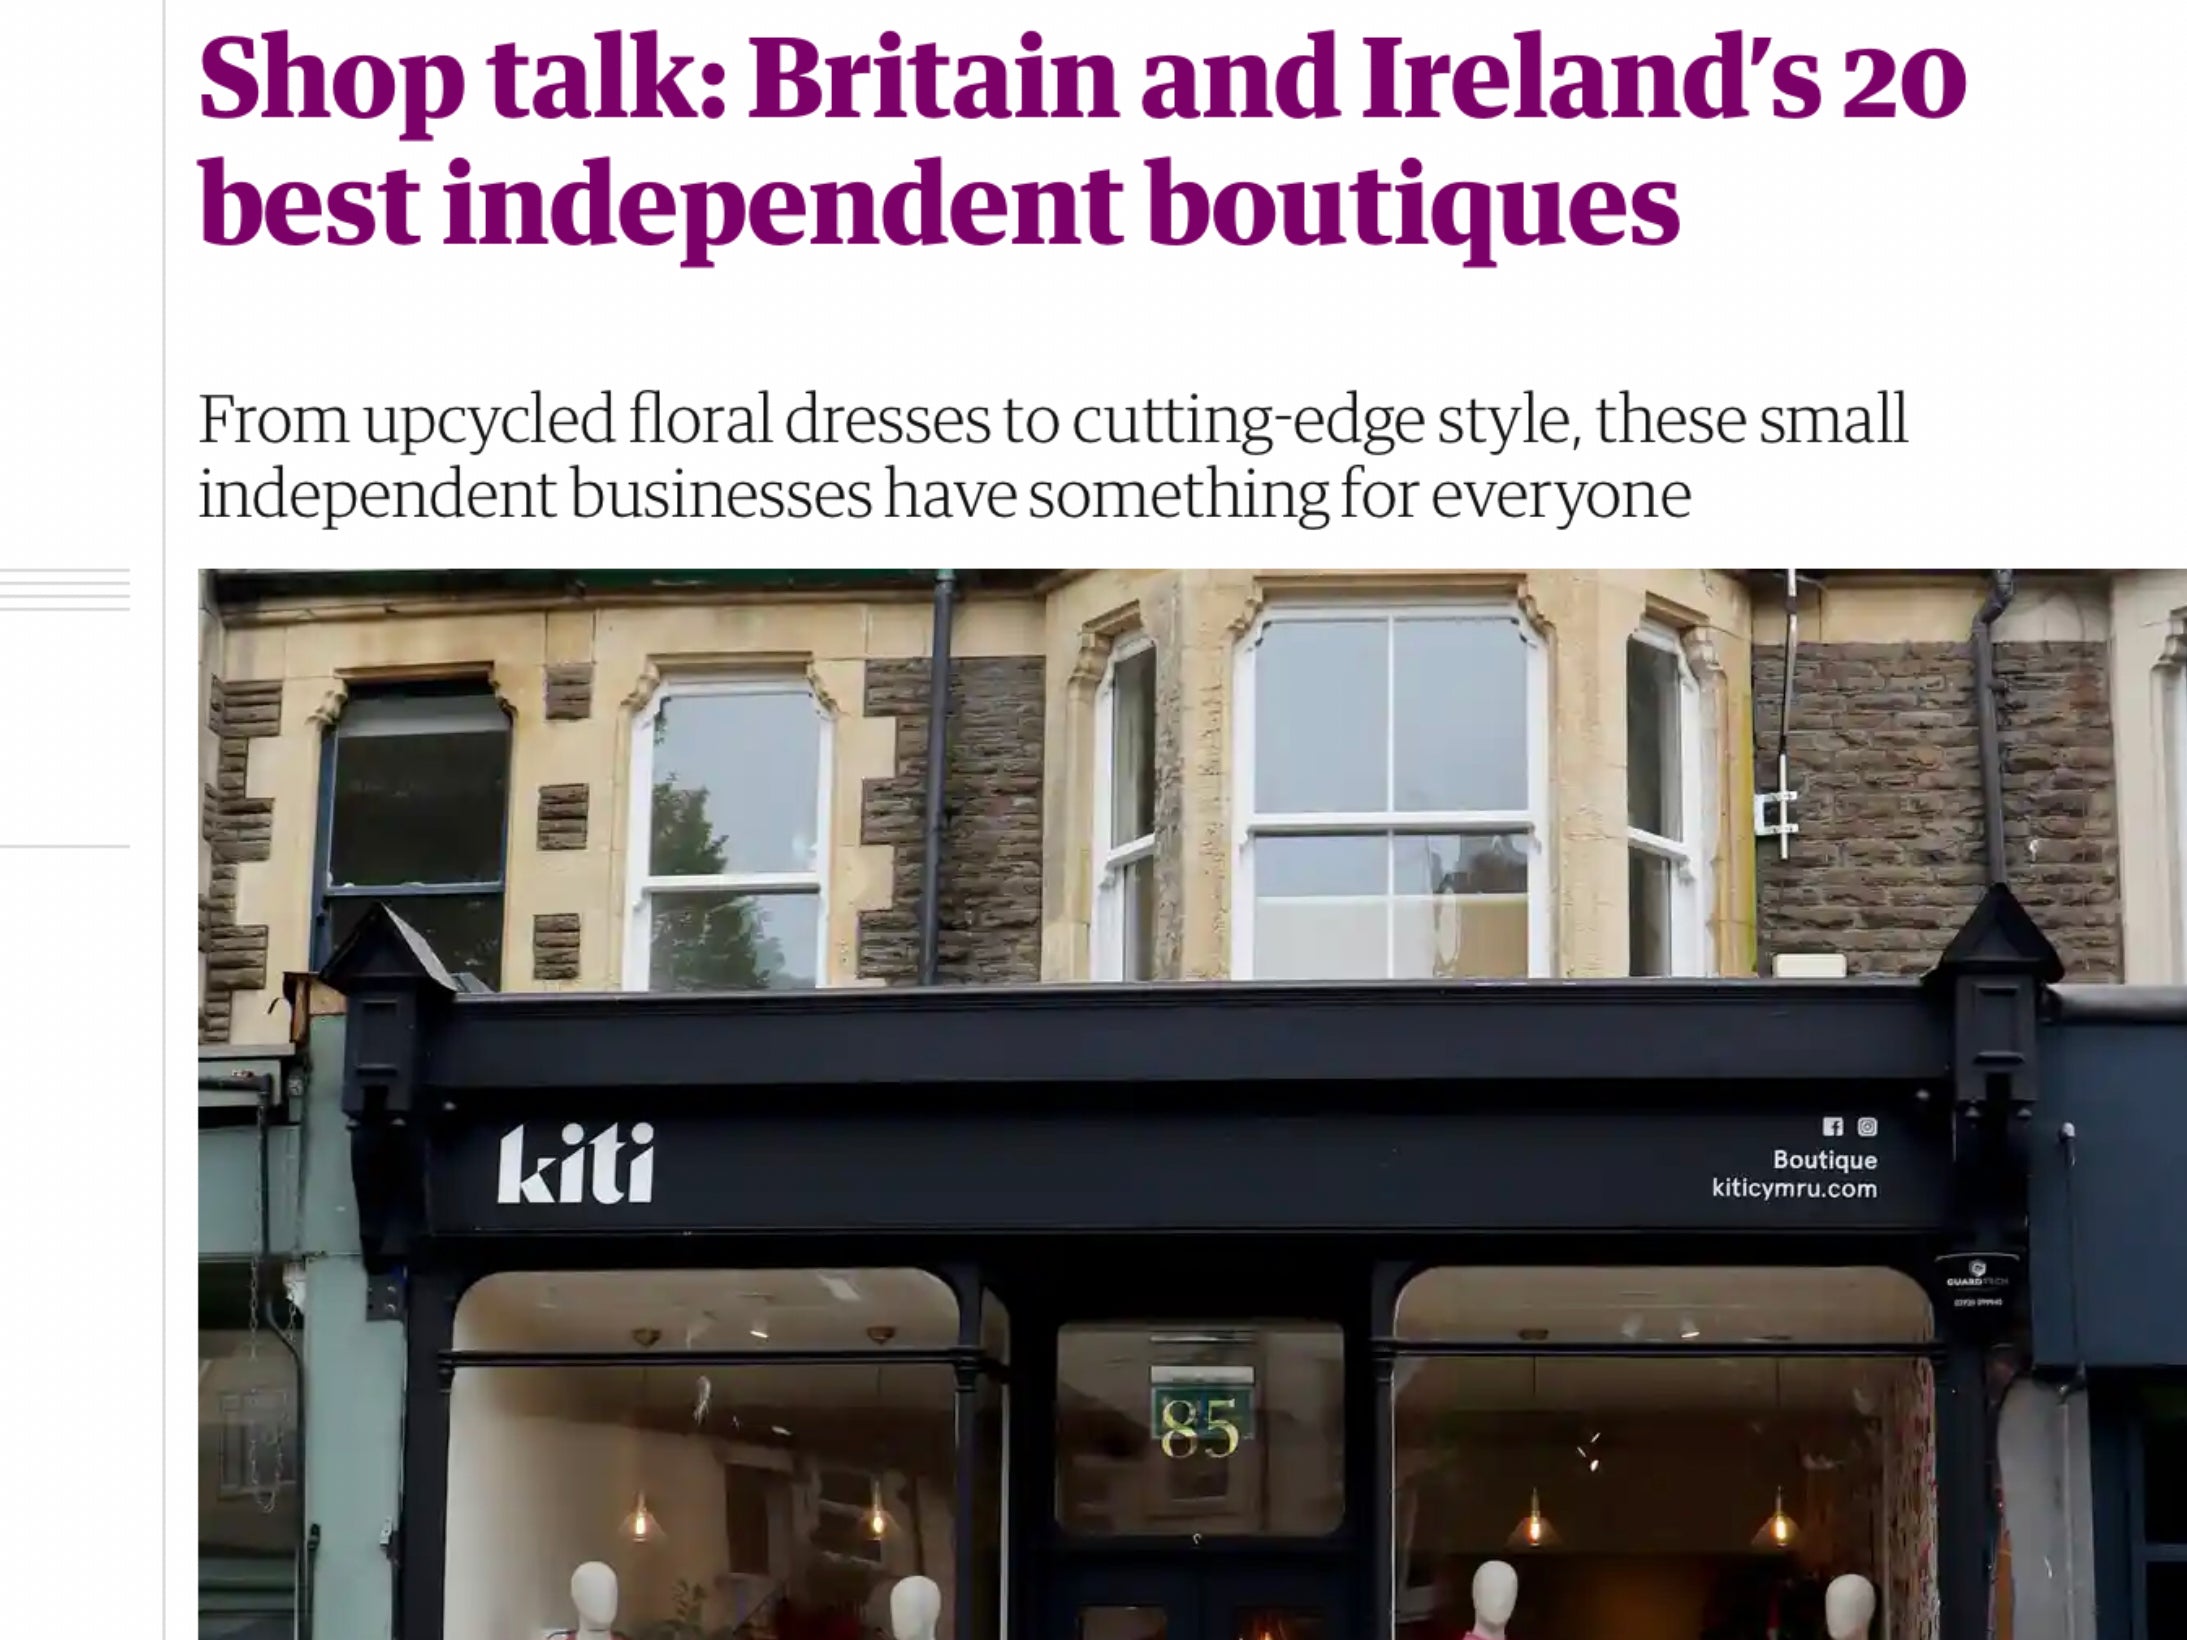 Top 20 independent boutique stores